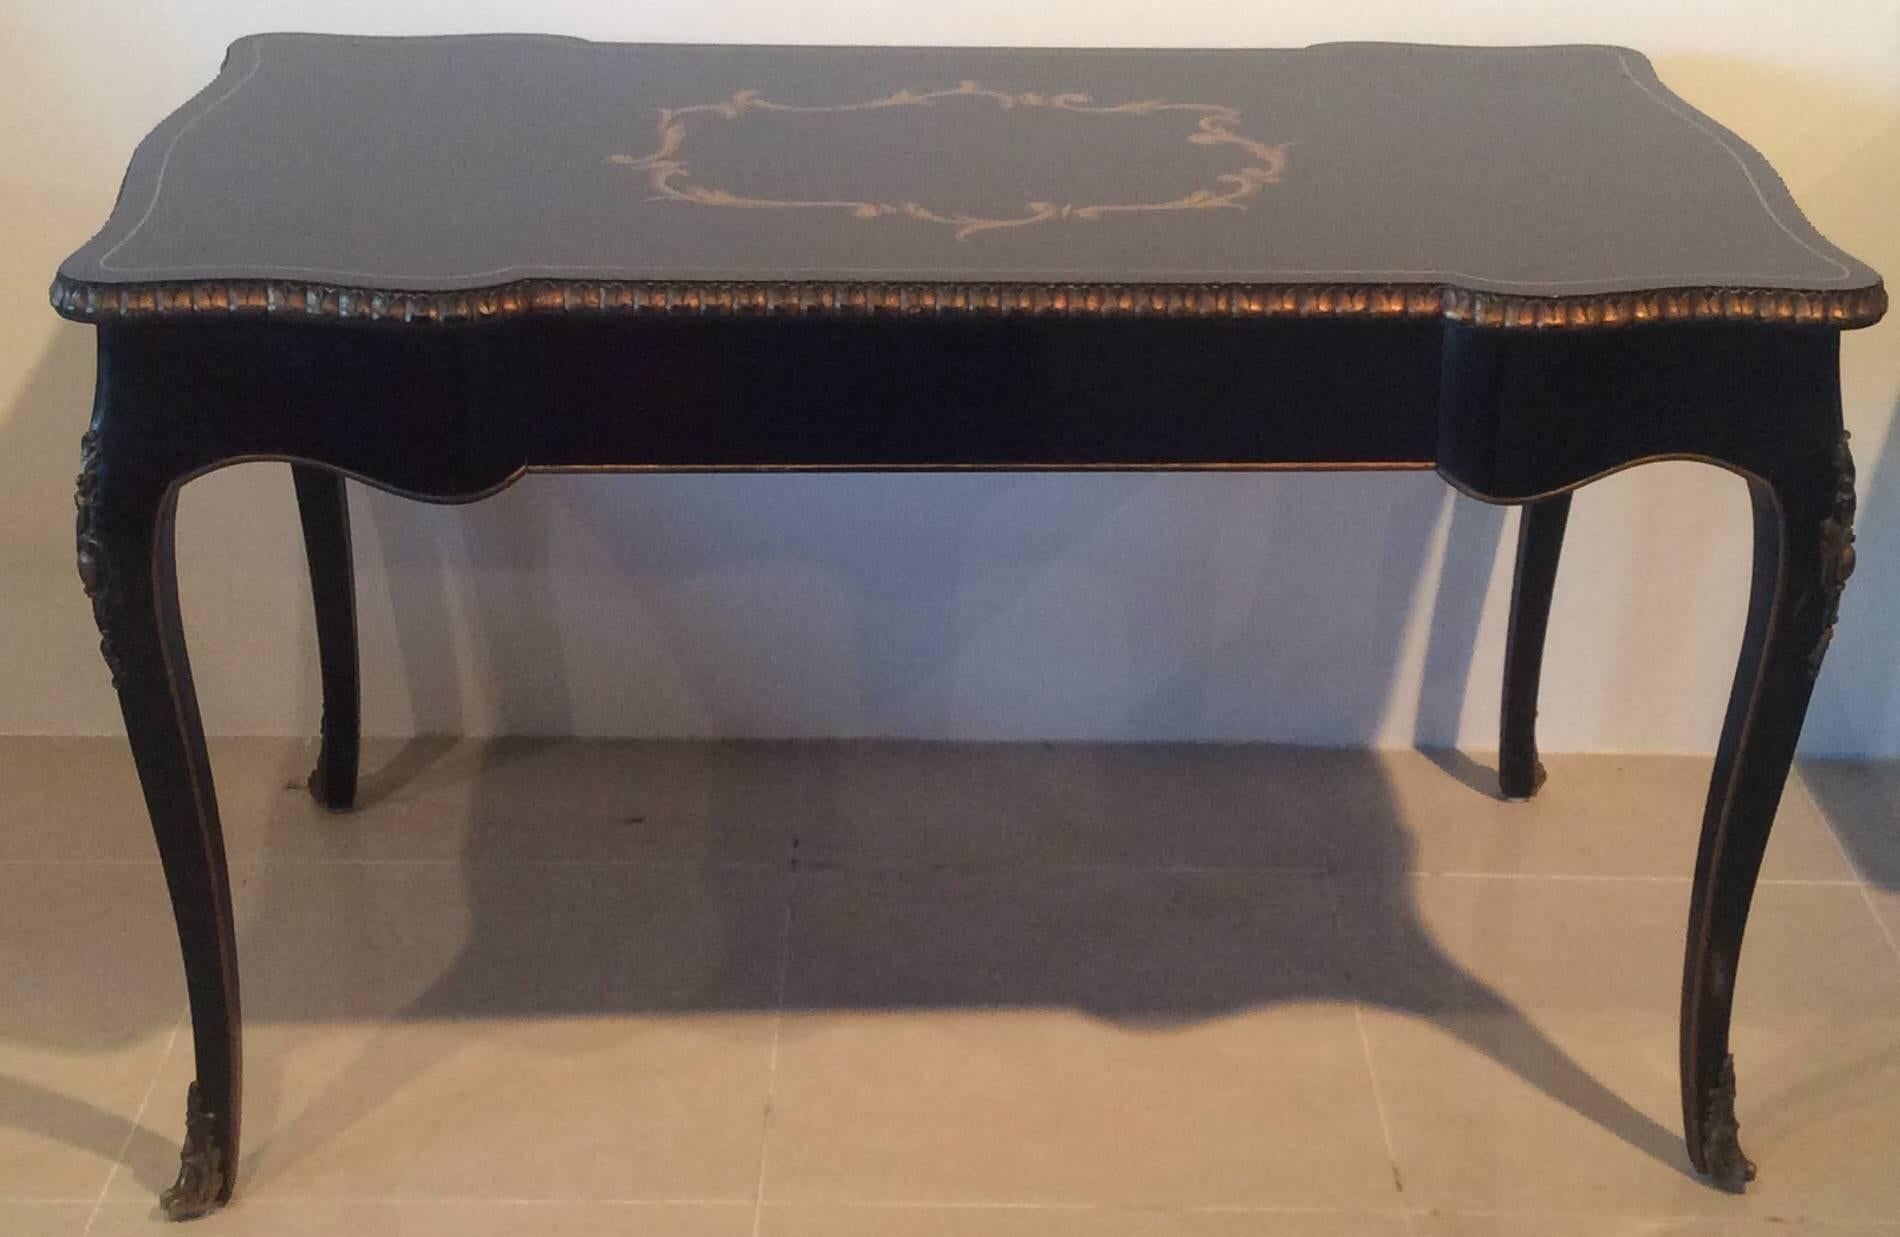 Lovely ornate vintage black and gold with ornate brass metal details on the legs French ormolu writing desk with drawer. So elegant with beautiful curves. Original finish, top has some scratches and scuffs. Brass has not been polished and has